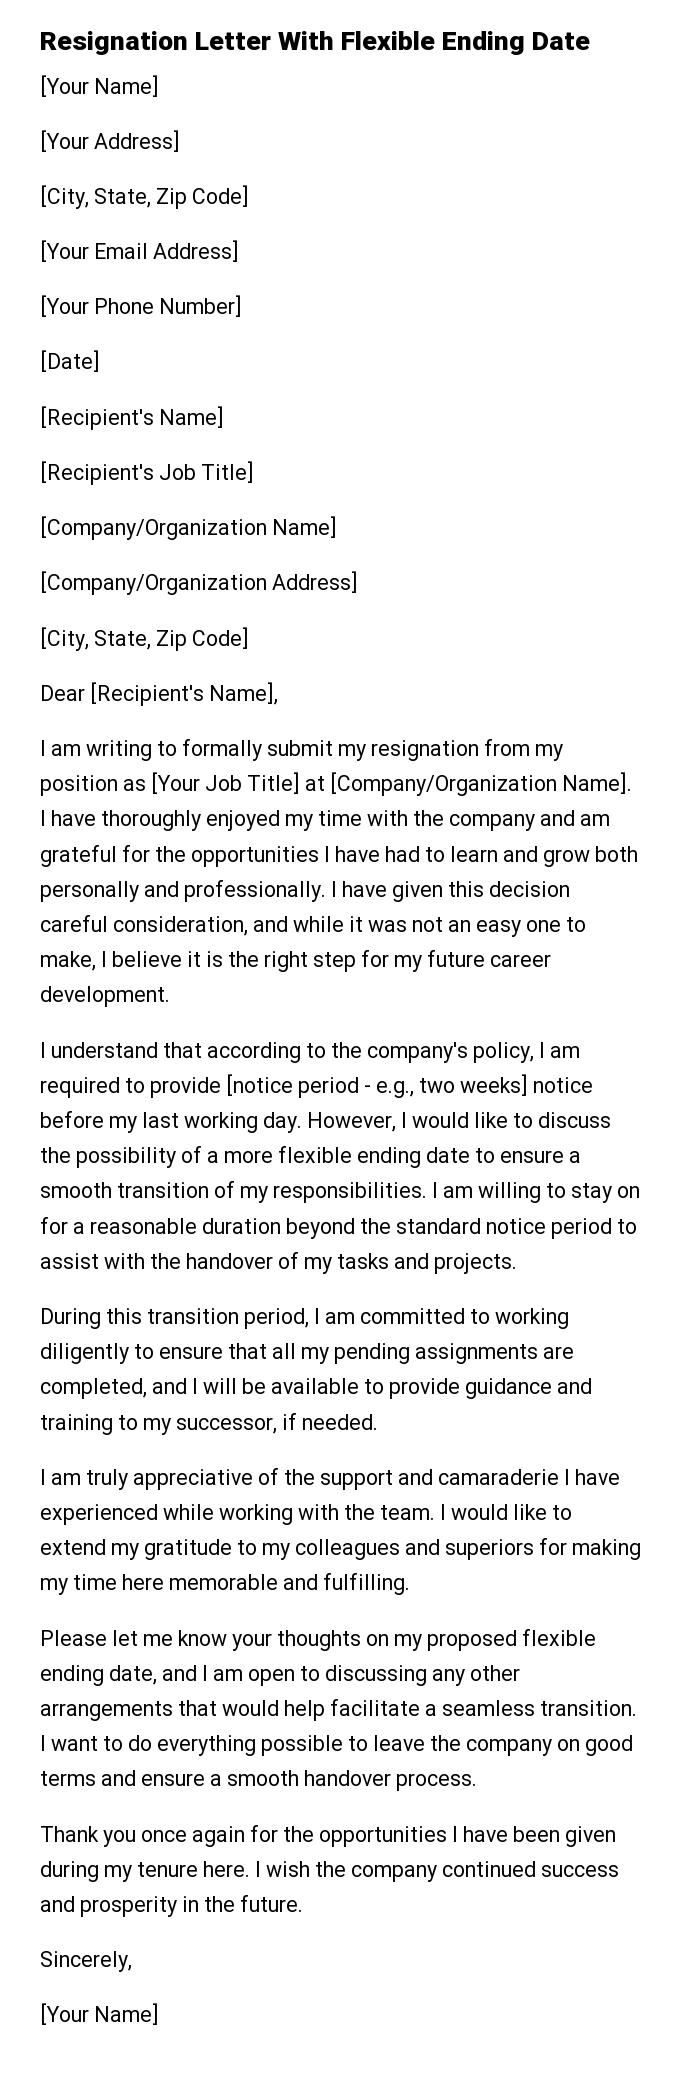 Resignation Letter With Flexible Ending Date